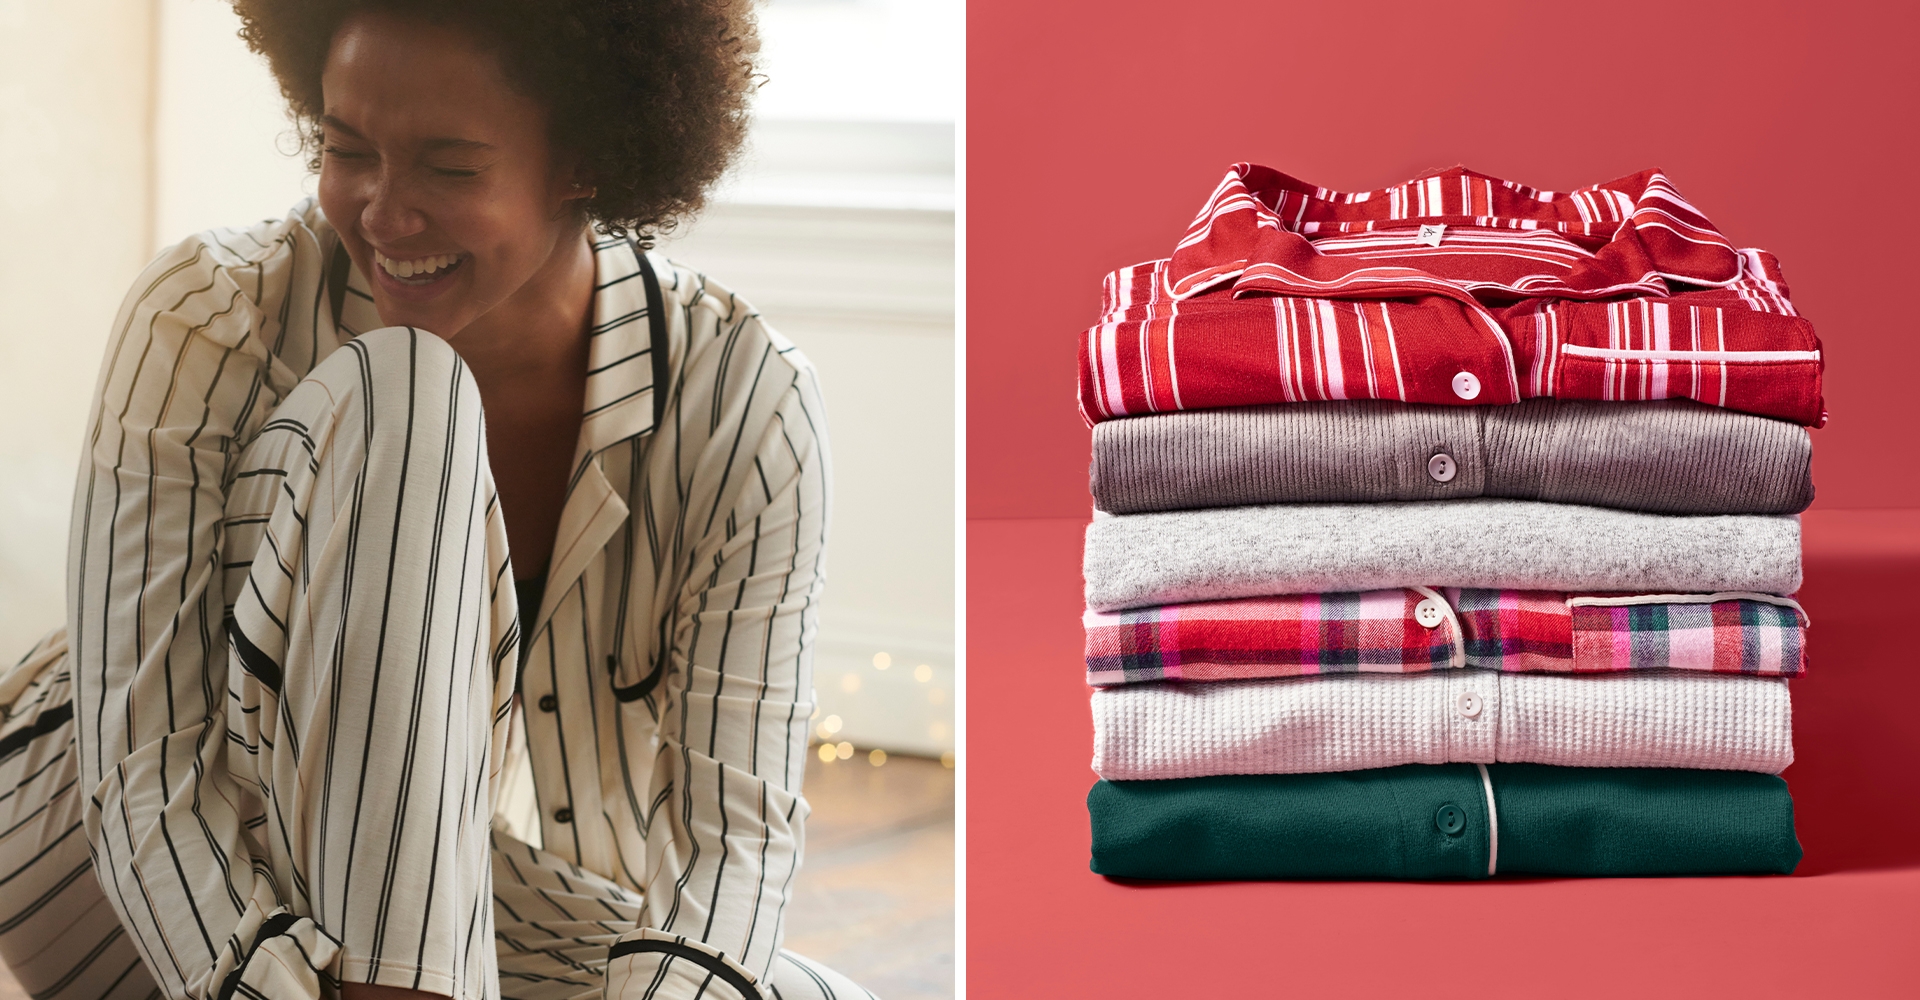  (Left) Soma<sup class=st-superscript>®</sup> model wearing black and white striped classic pajamas. (Right) Stack of pajama tops in a variety of colors, prints, and solids.